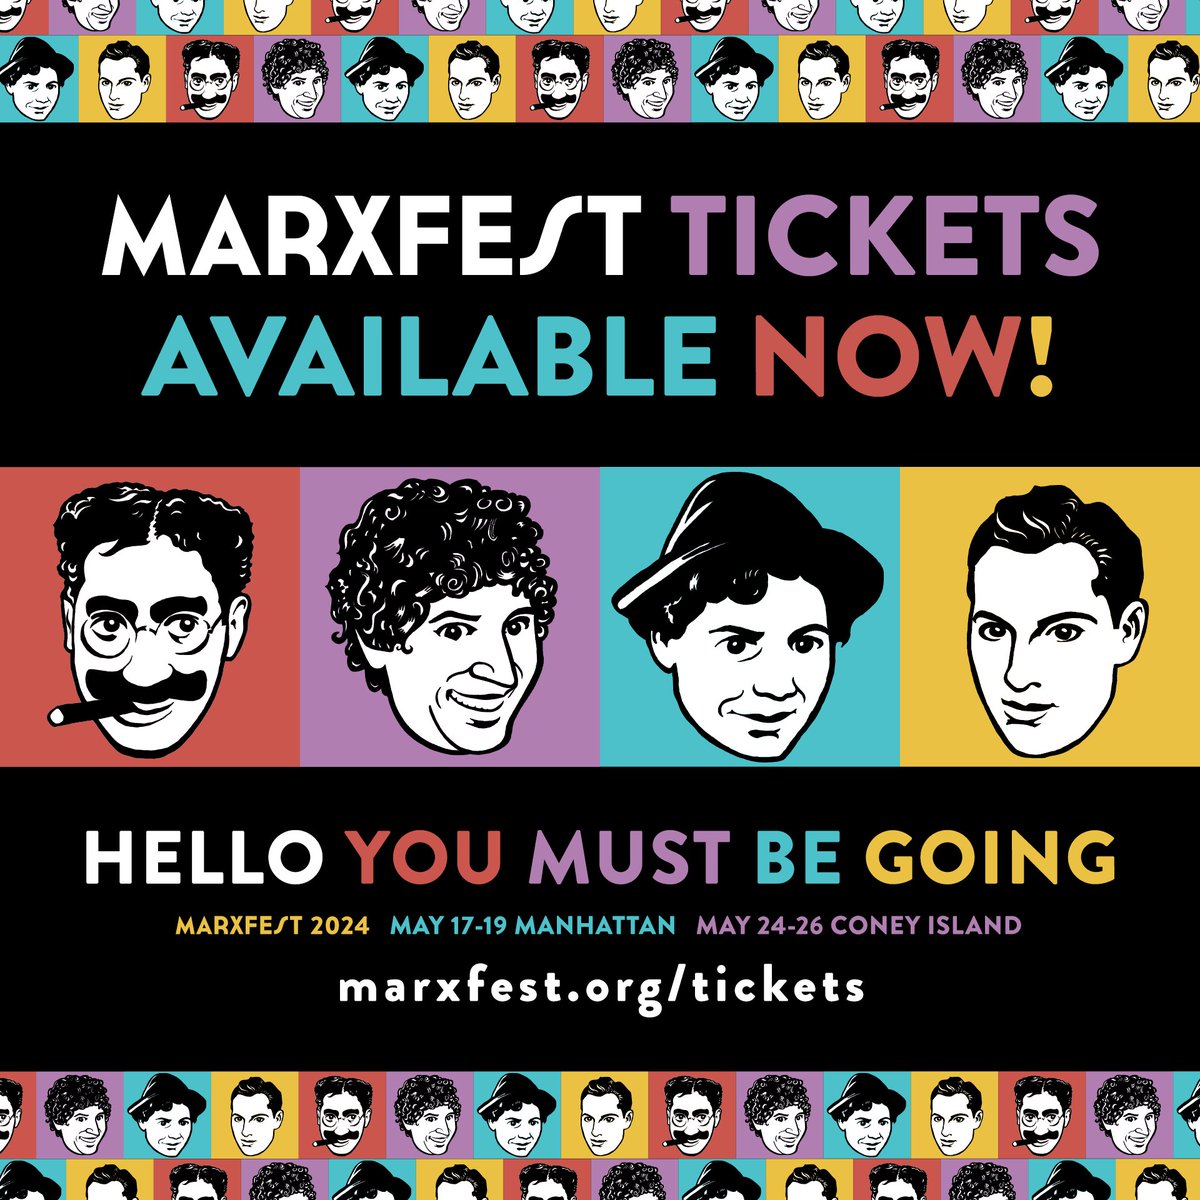 Tickets are on sale now for @marxfest! We will be presenting Out of Line: Hirschfeld Draws the Marxes and Friends on Friday, May 17! We hope to see you there! Get tickets here: marxfest.org/tickets